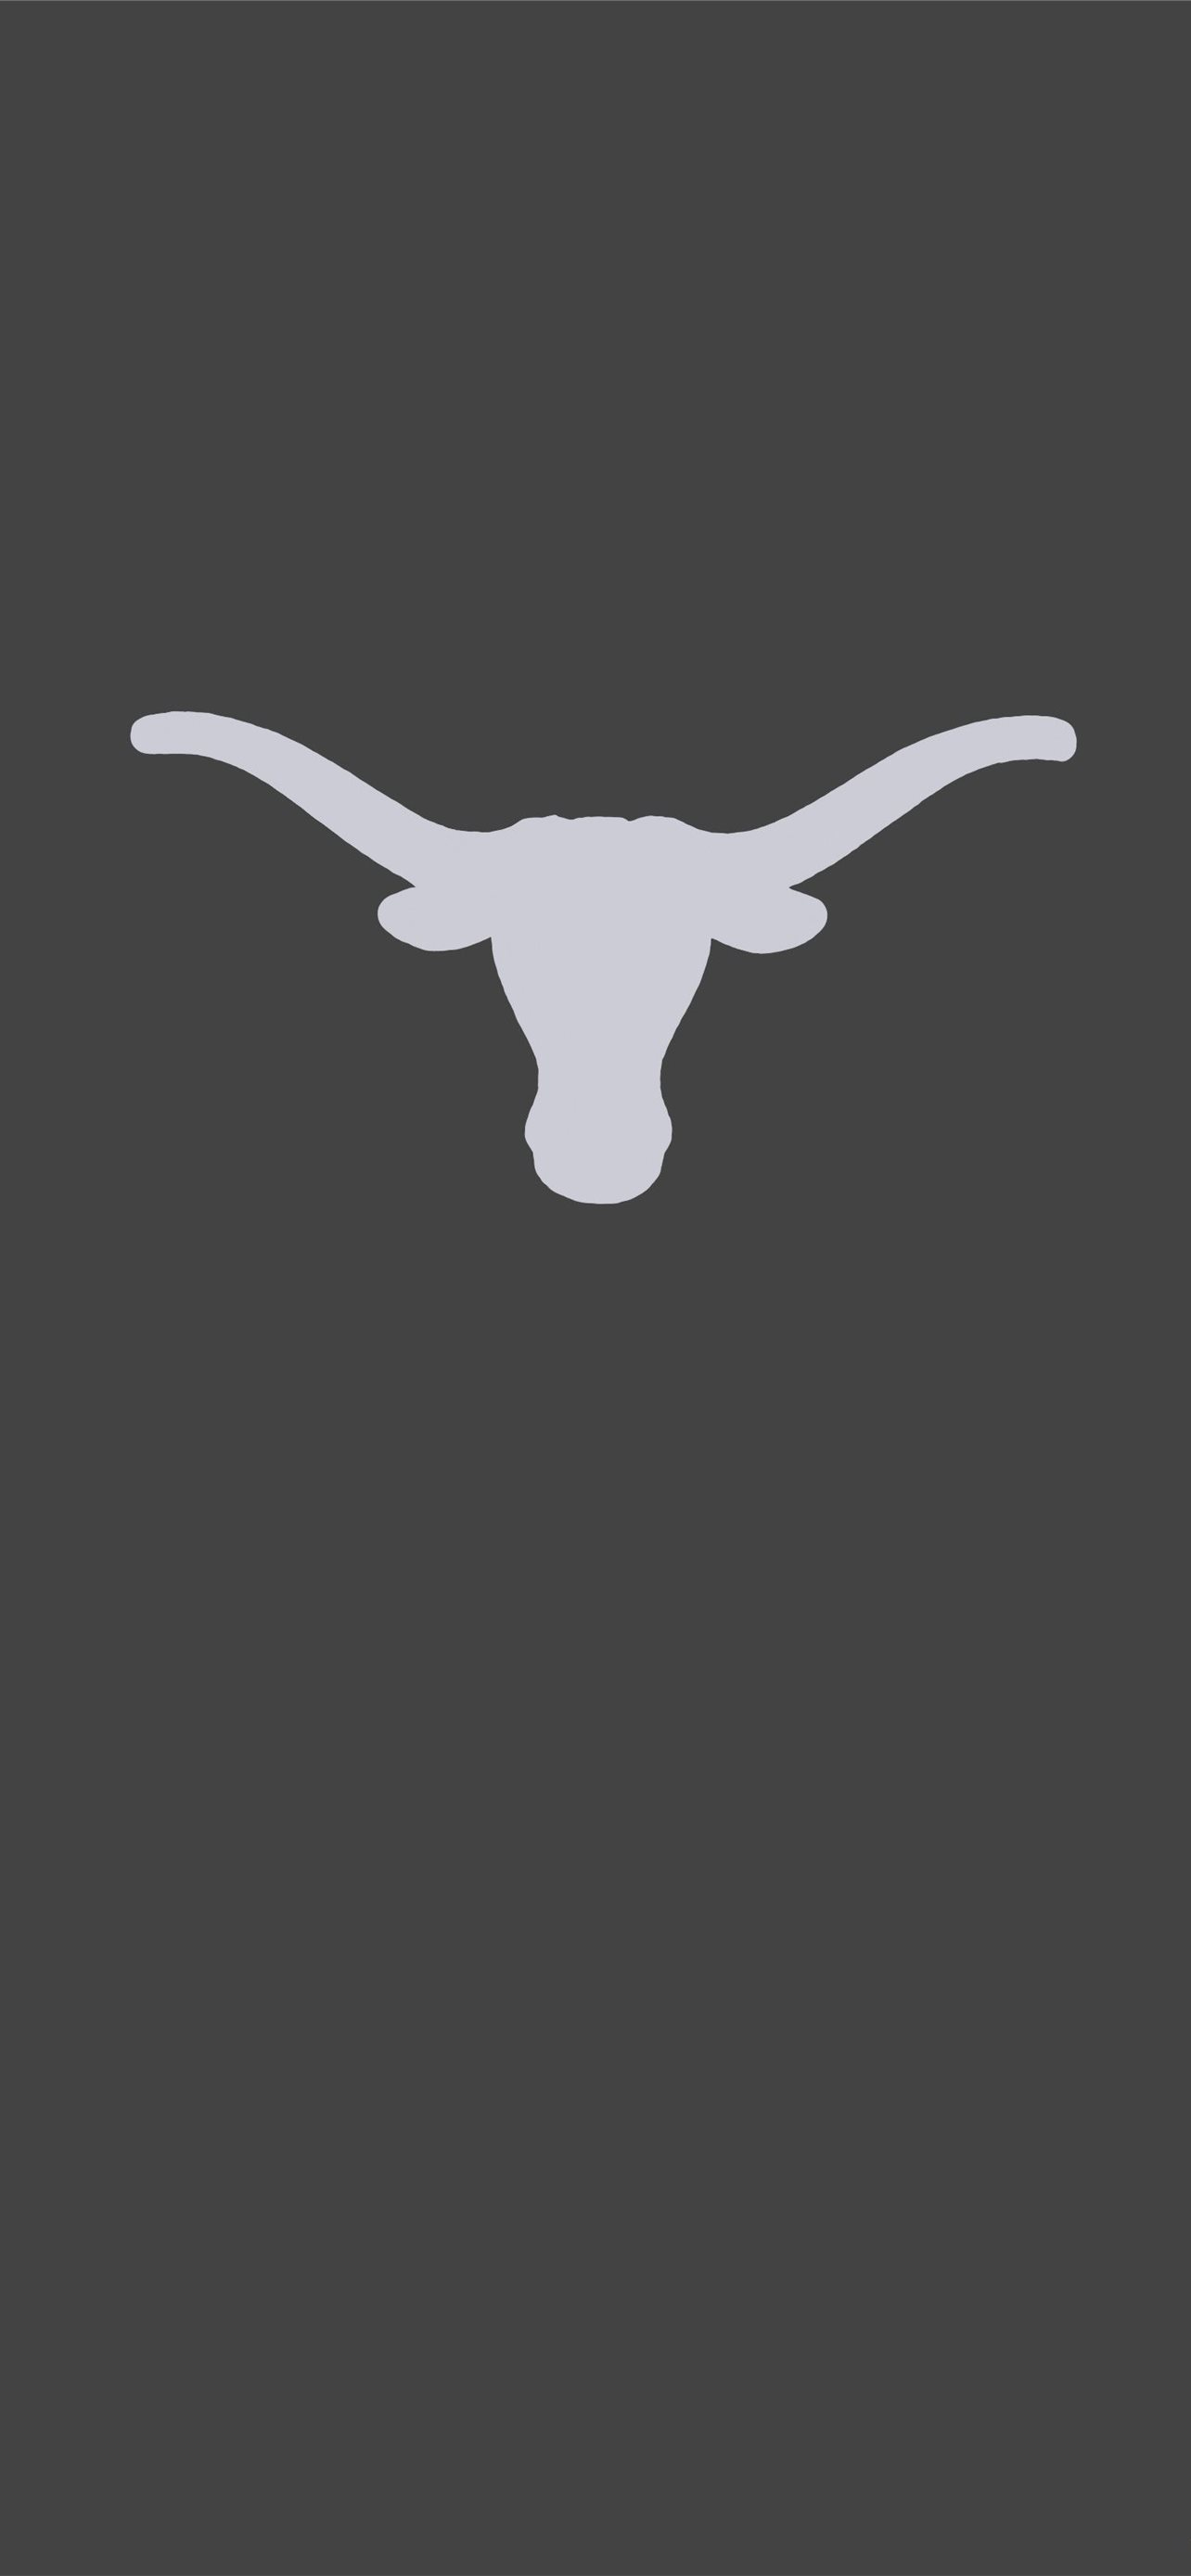 1284x2778 texas iPhone Wallpapers Free Download